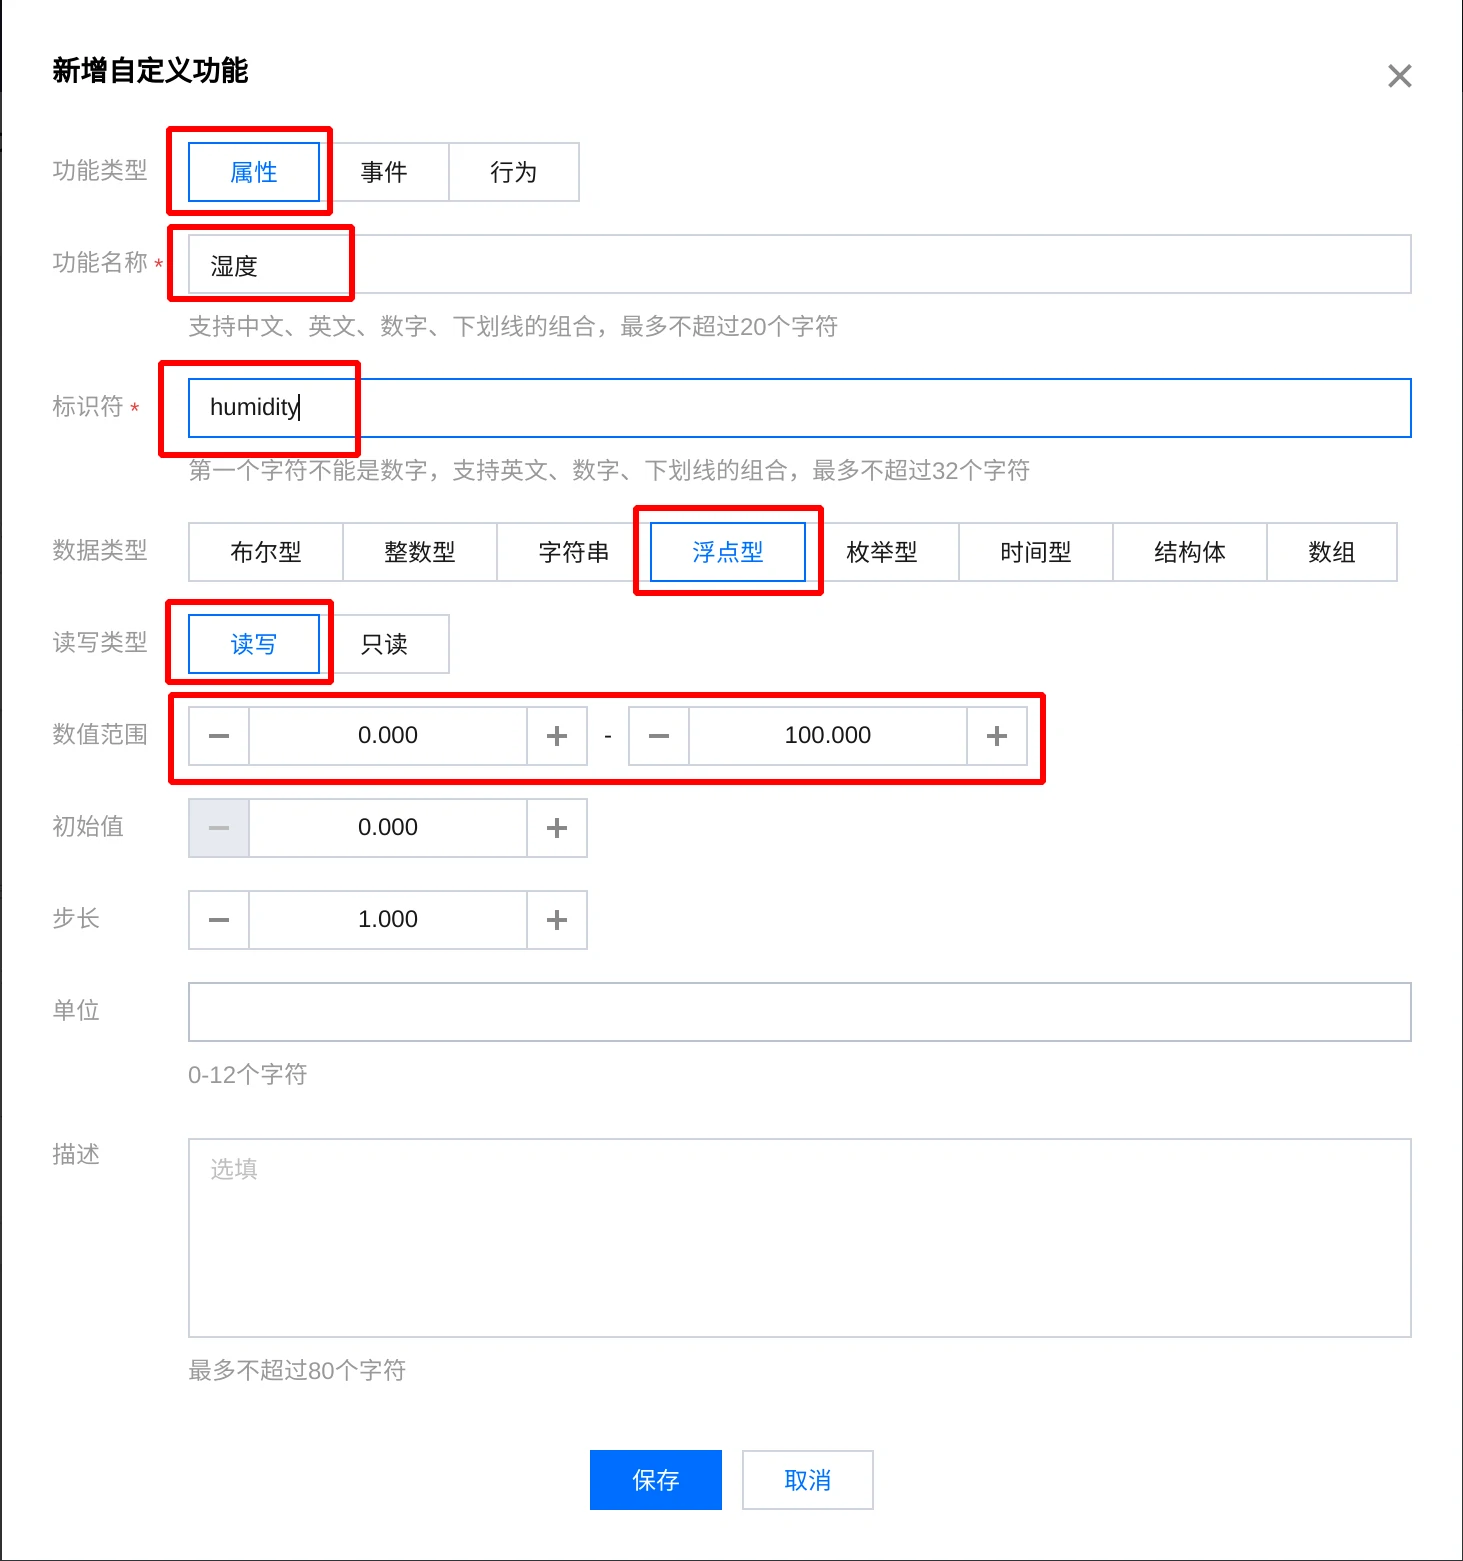 Define more functions based on your requirements for the Tencent Cloud IoT product.